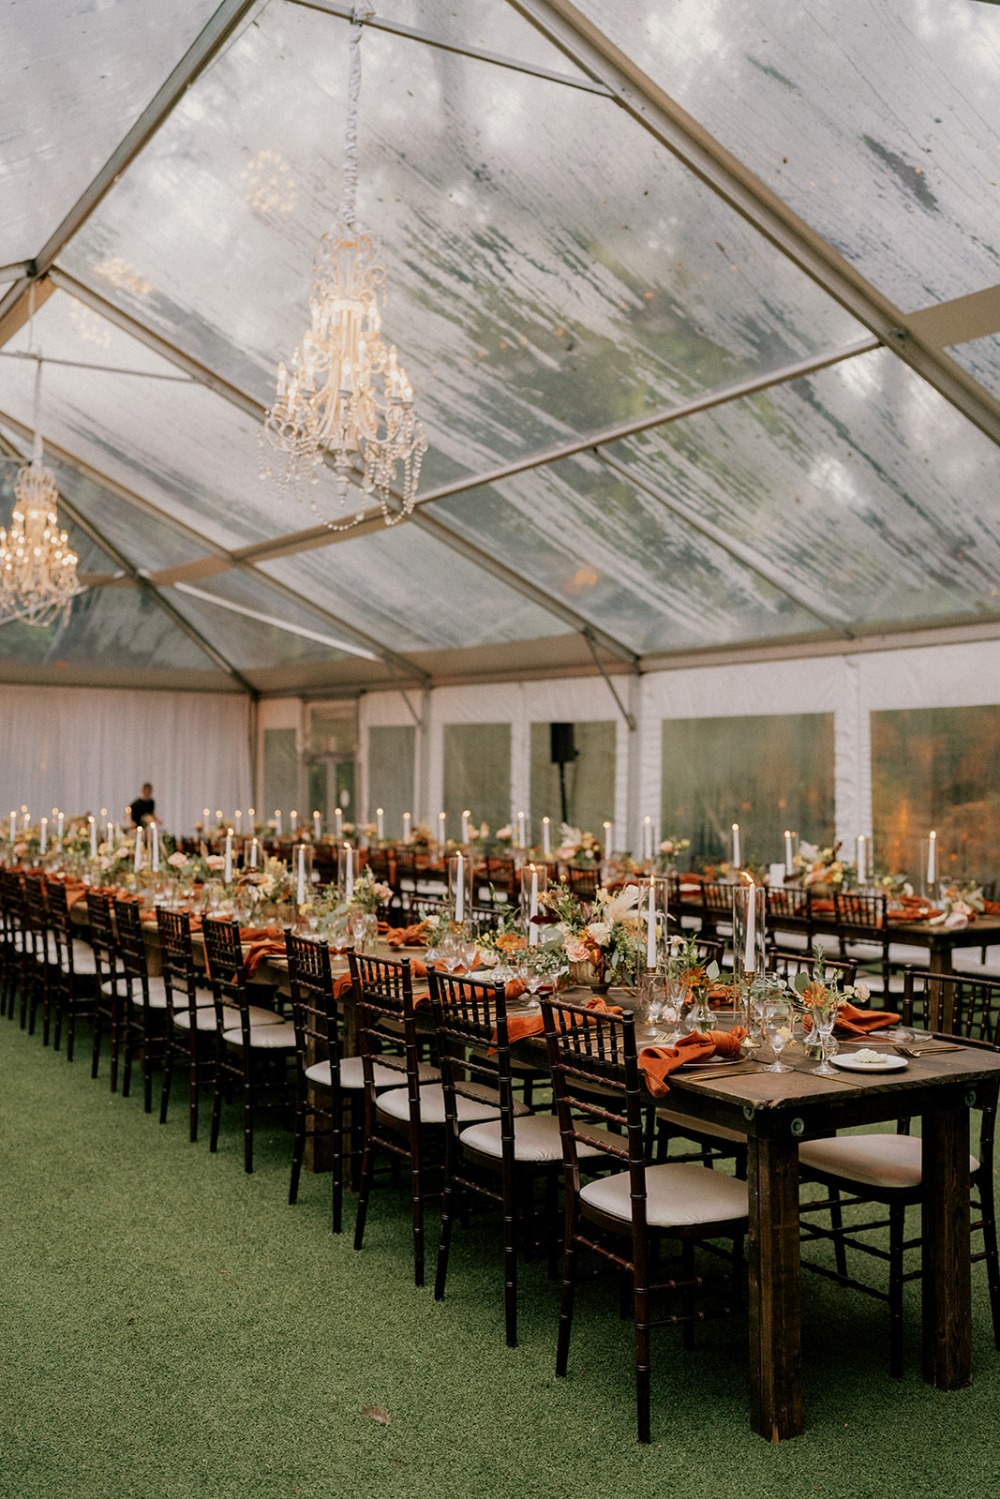 An Earthy, Organic Color Palette Made this Miami Wedding Magical